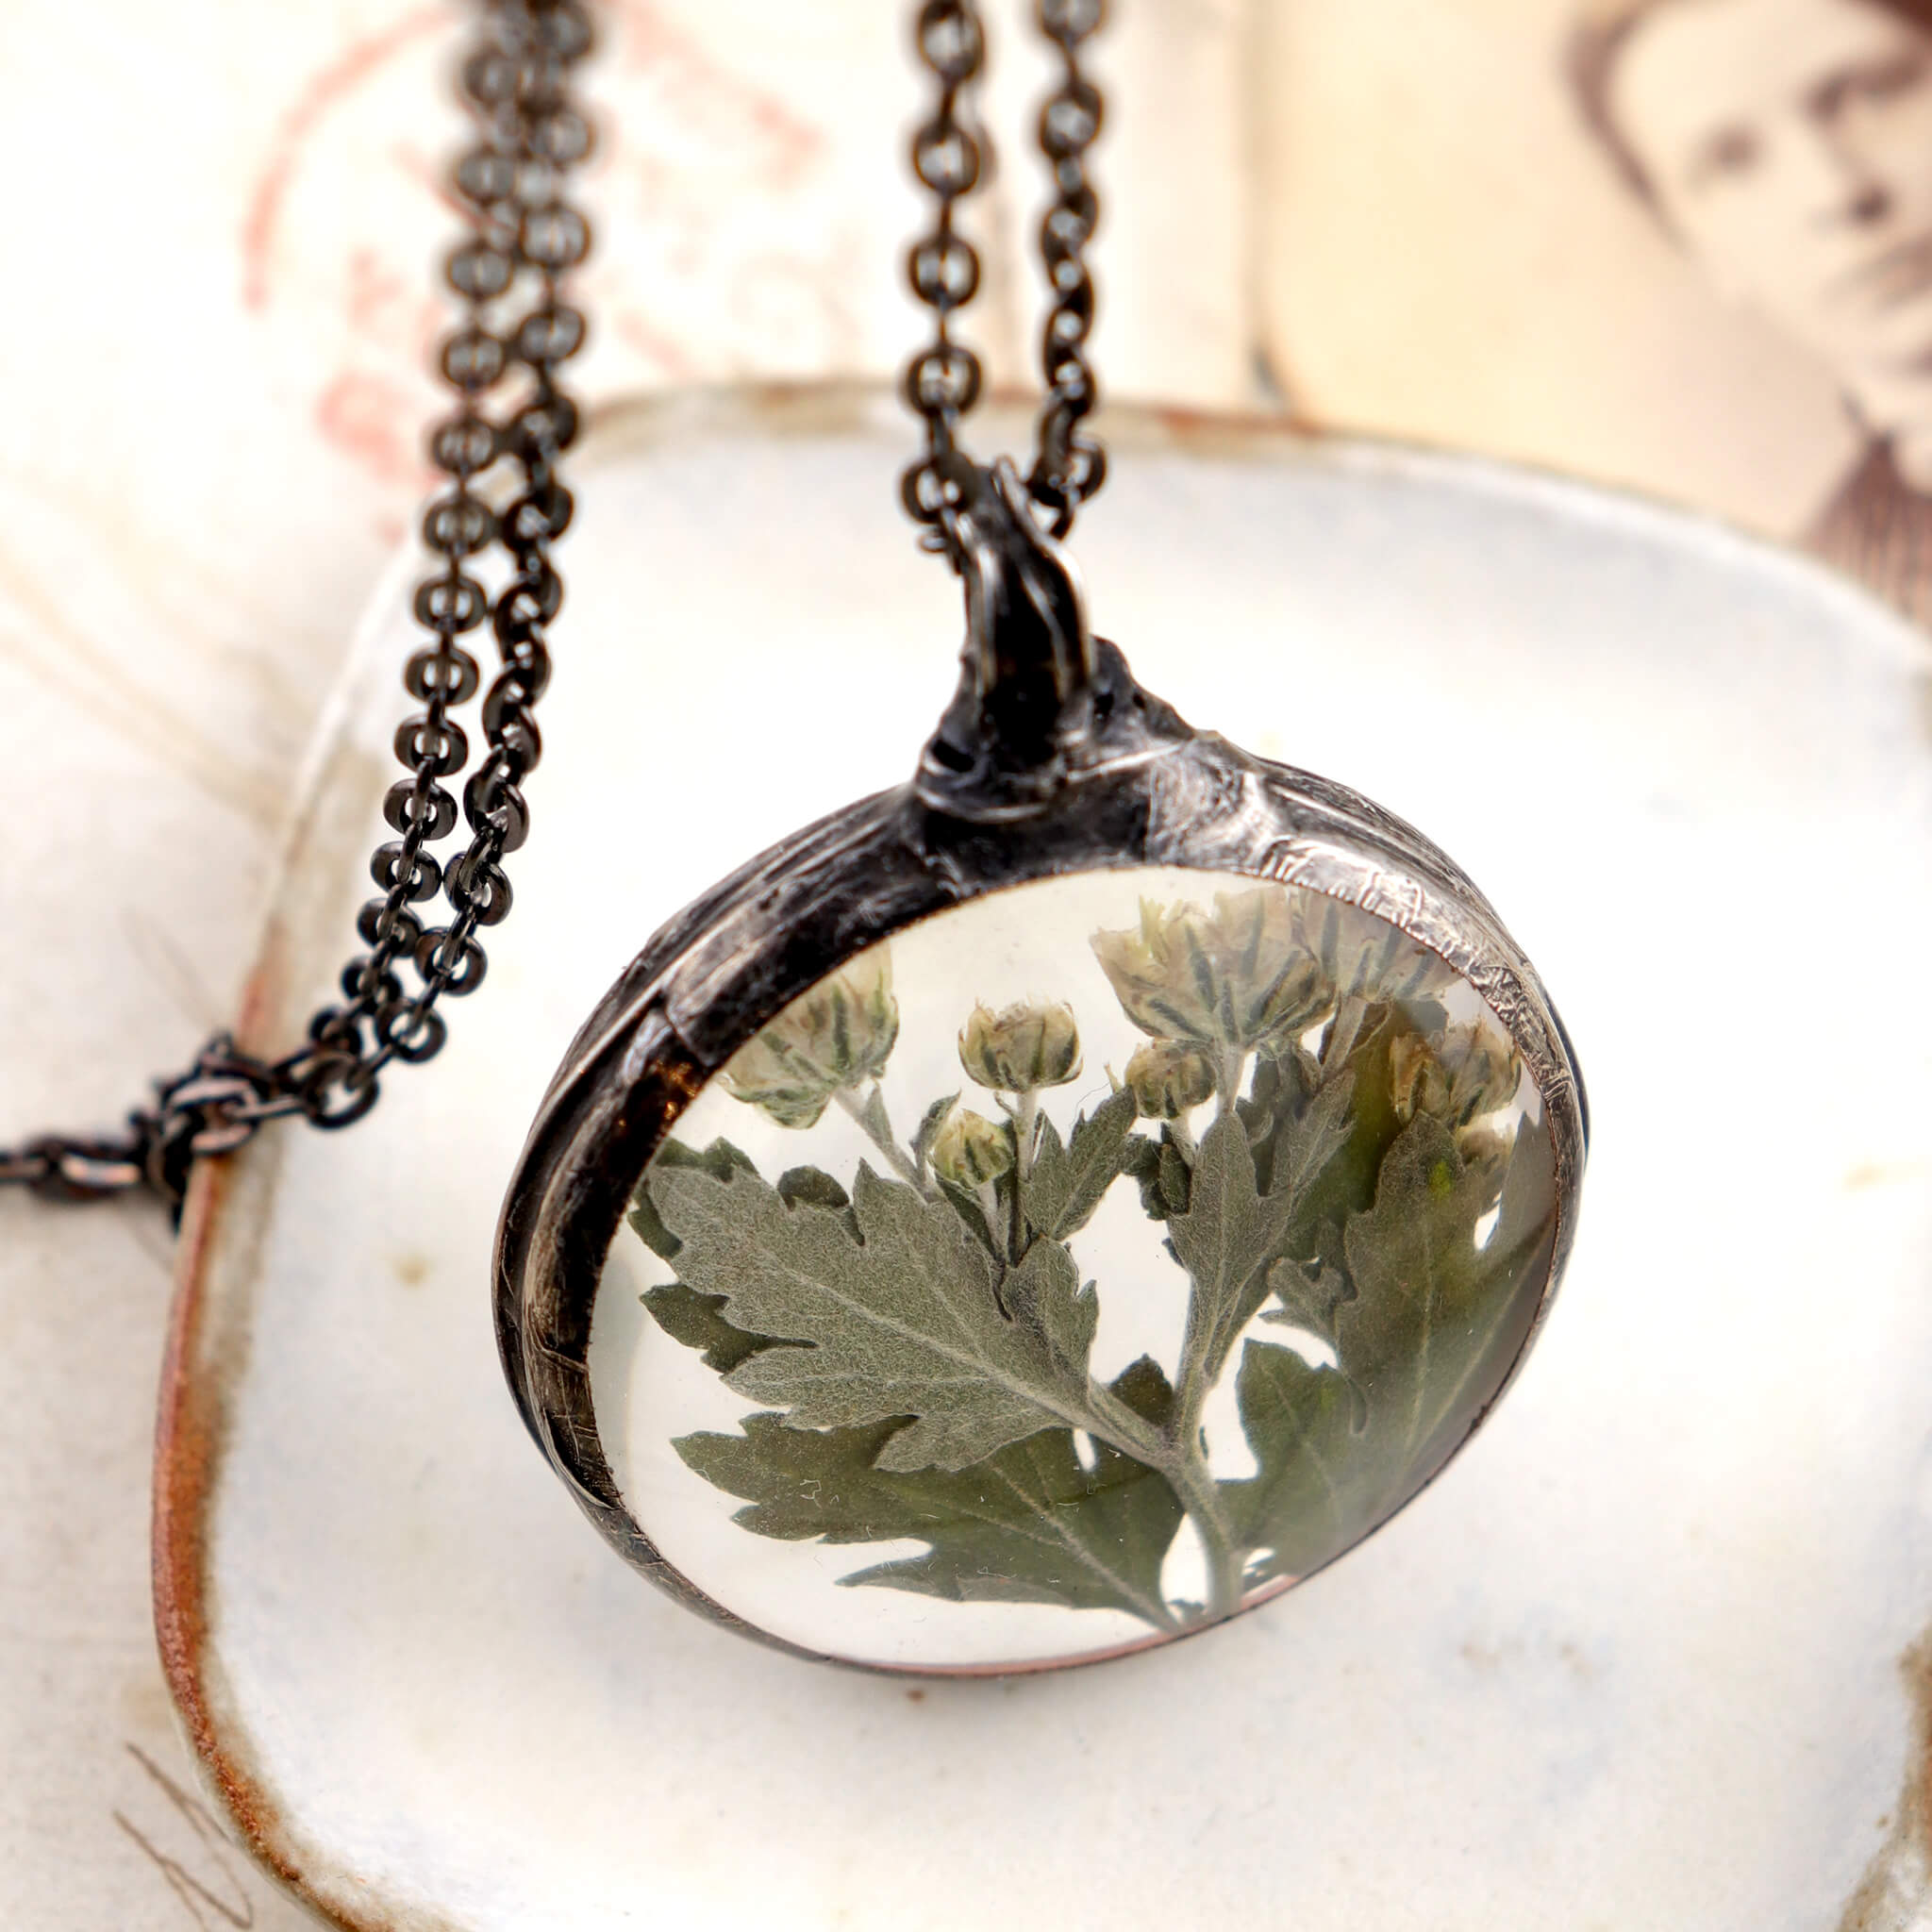 Pressed flowers necklace